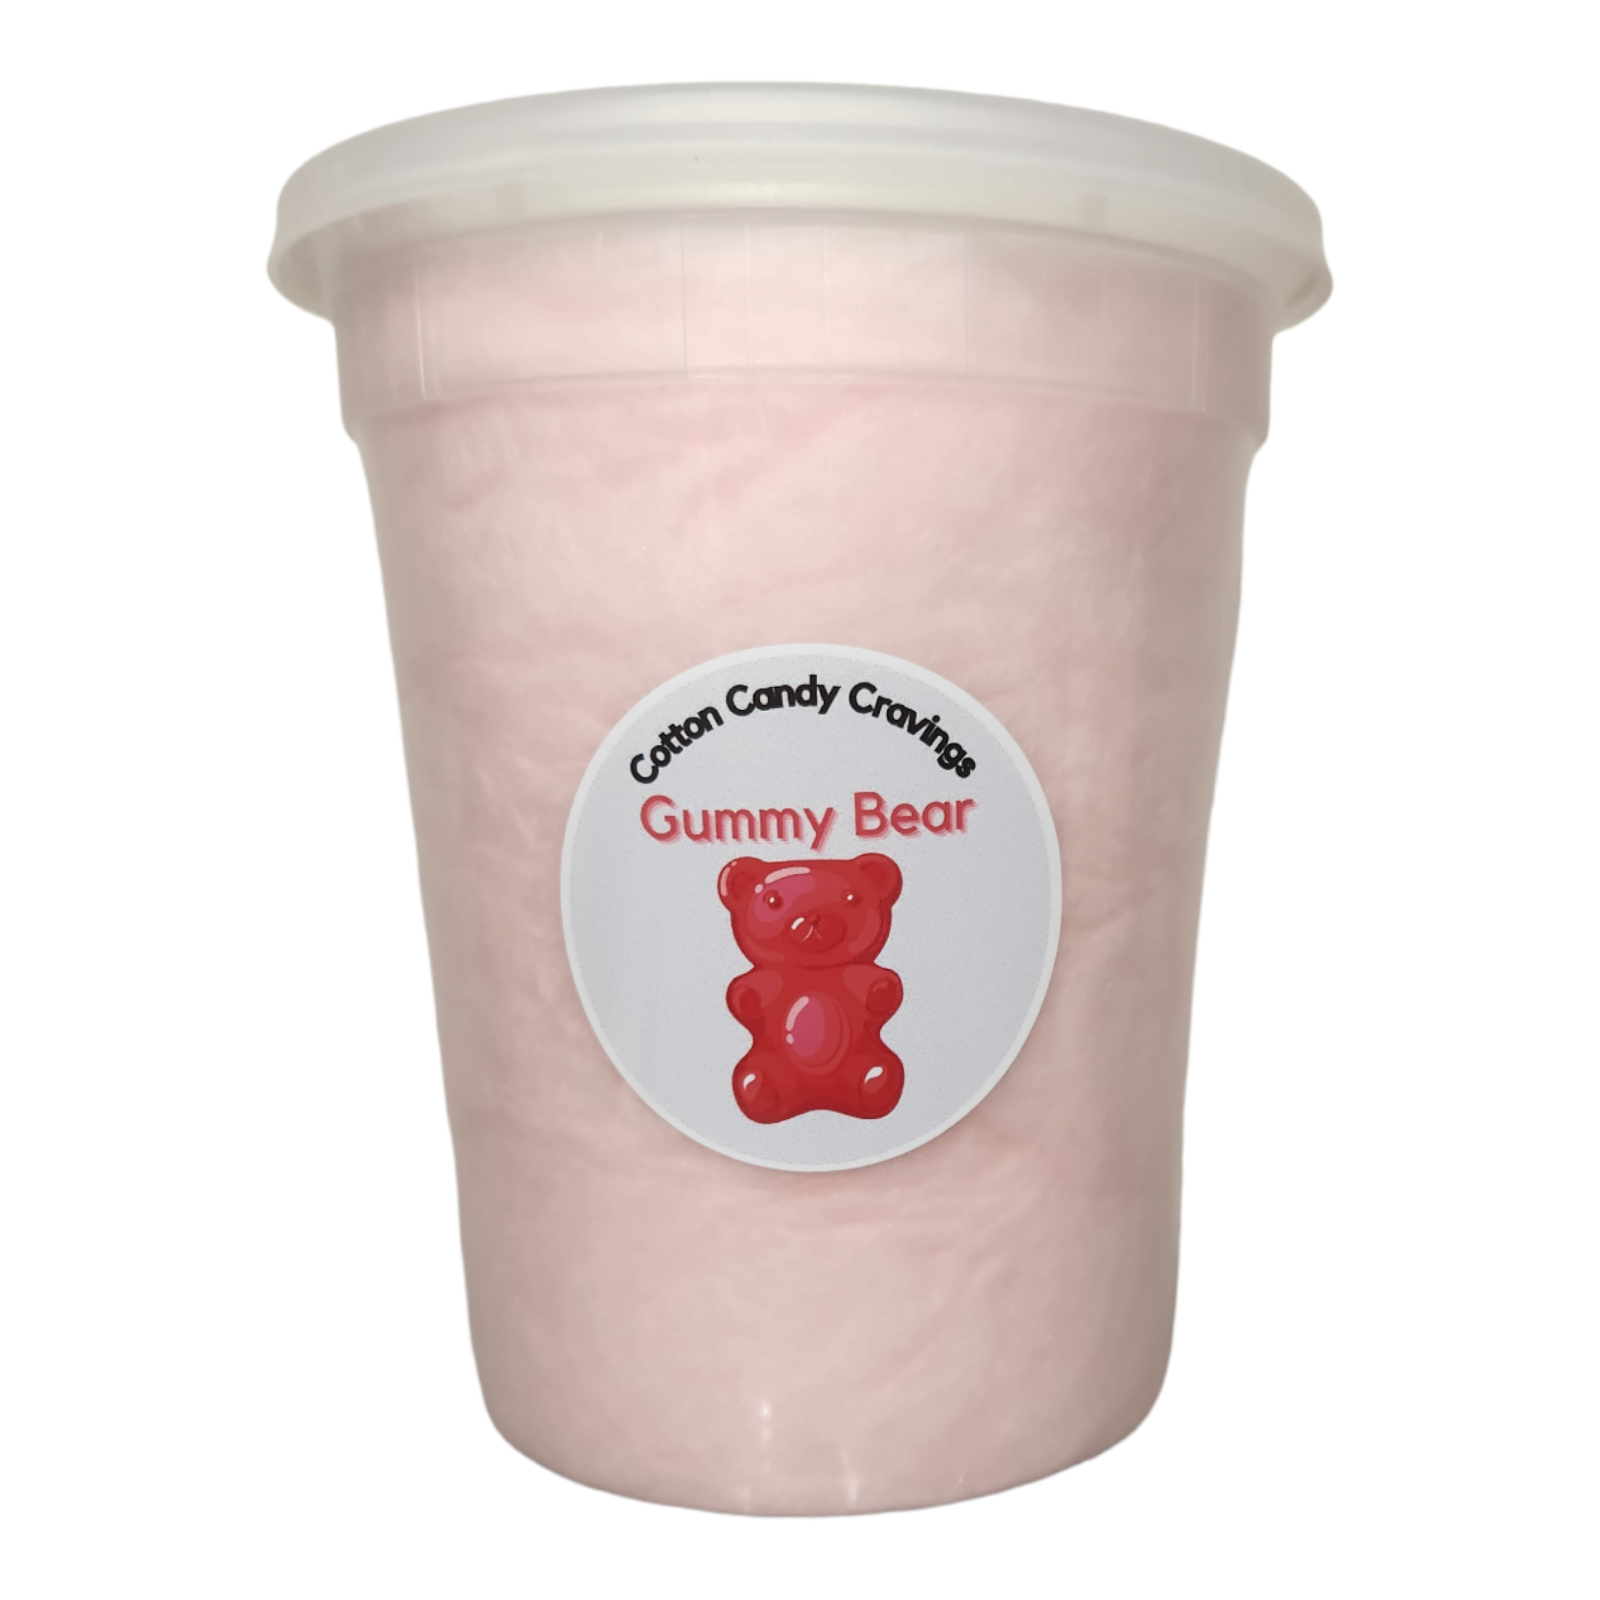 Cotton Candy Tub, Buy Cotton Candy Online